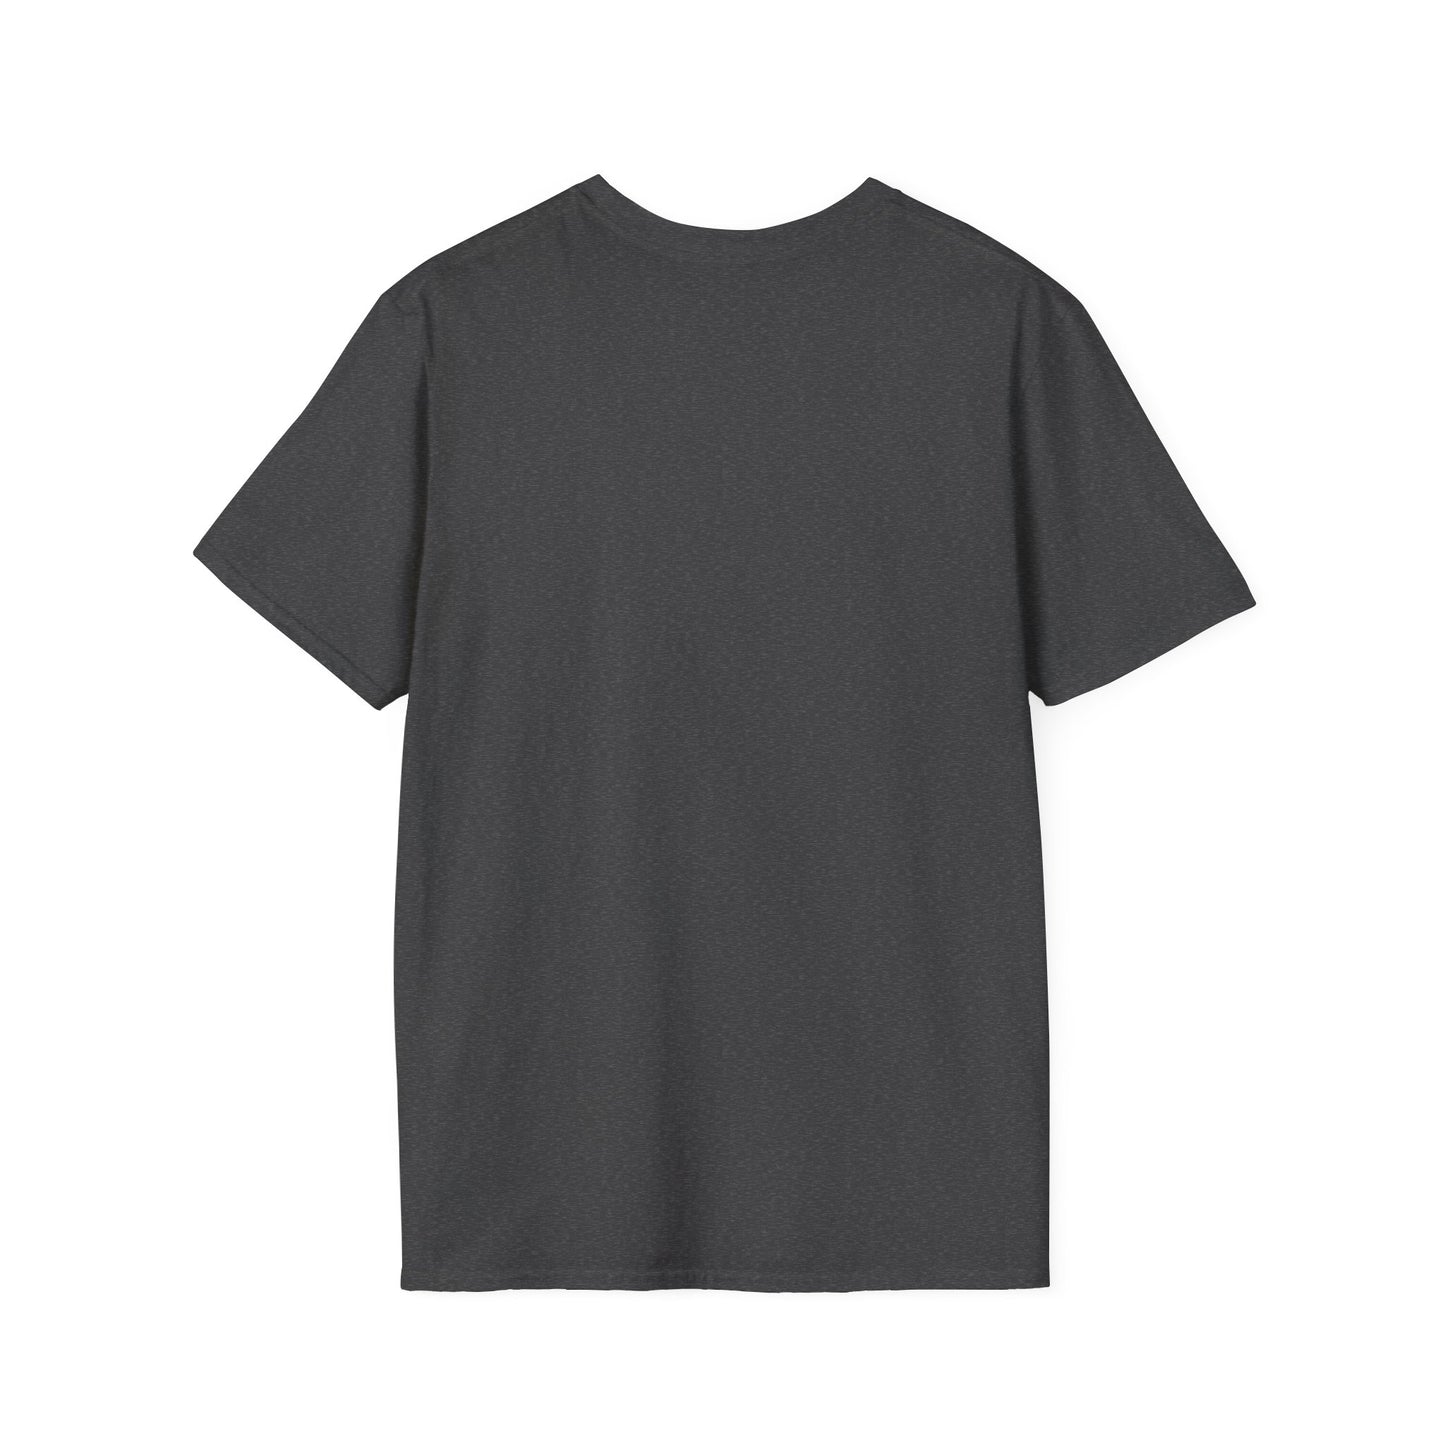 Unisex Softstyle T-Shirt 1 - River